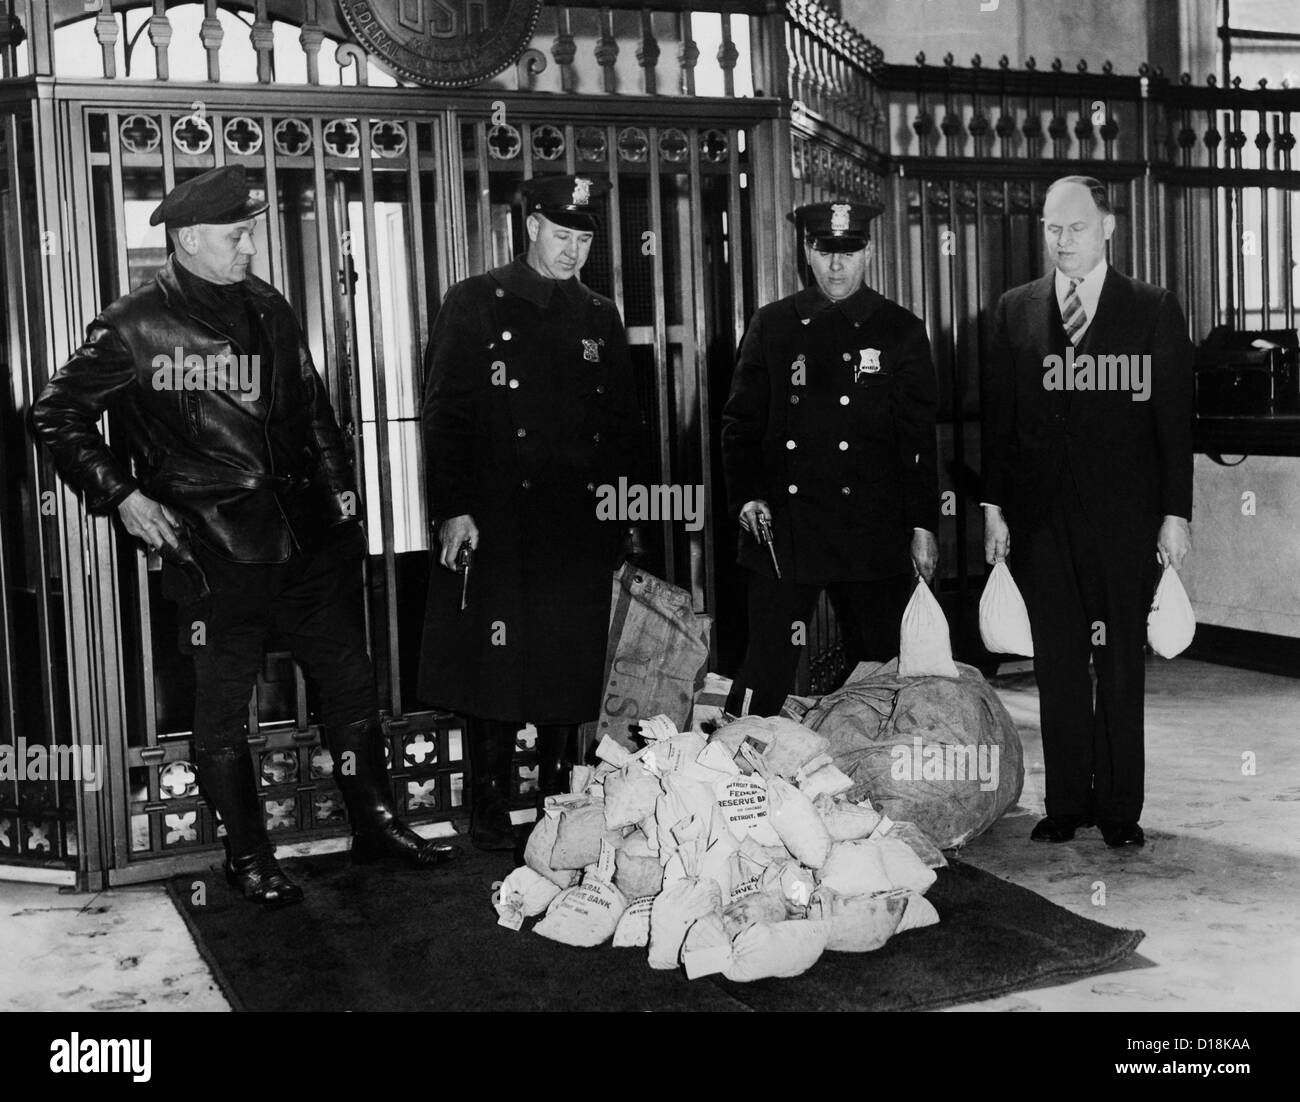 Payroll money for Detroit Workers. Police guard money arriving at the Chrysler Emergency Bank in Detroit. The Michigan Governor Stock Photo